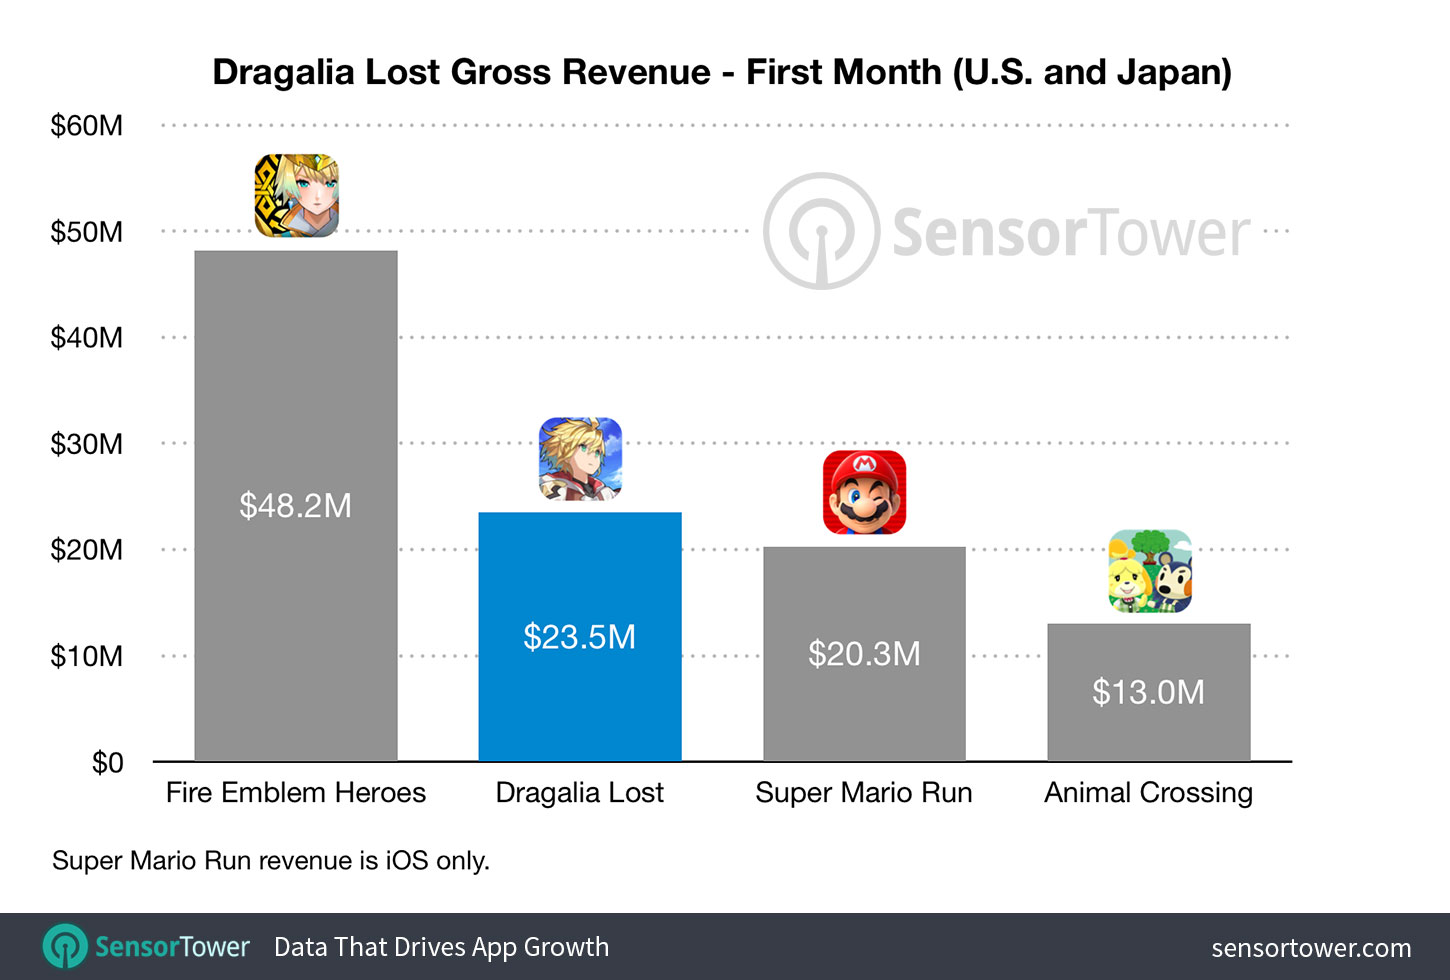 Dragalia Lost Revenue First Month Compared to Other Nintendo Mobile Games